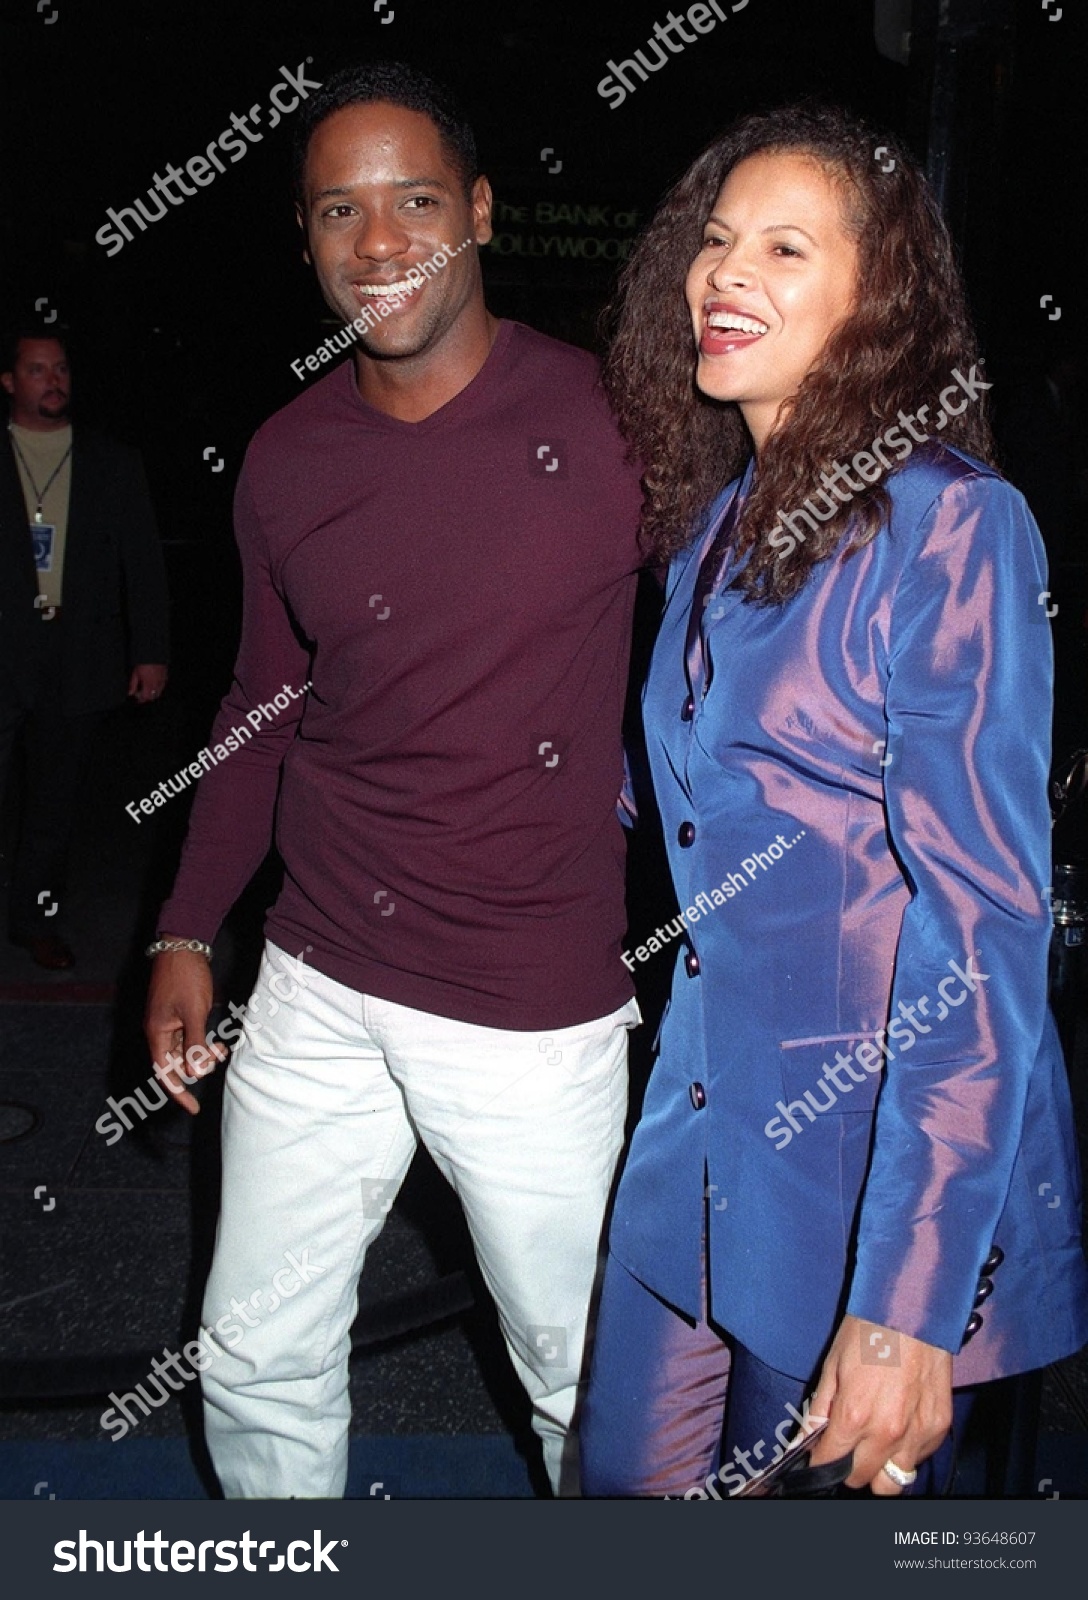 23sep97: Actor Blair Underwood & Wife At The Los Angeles ...